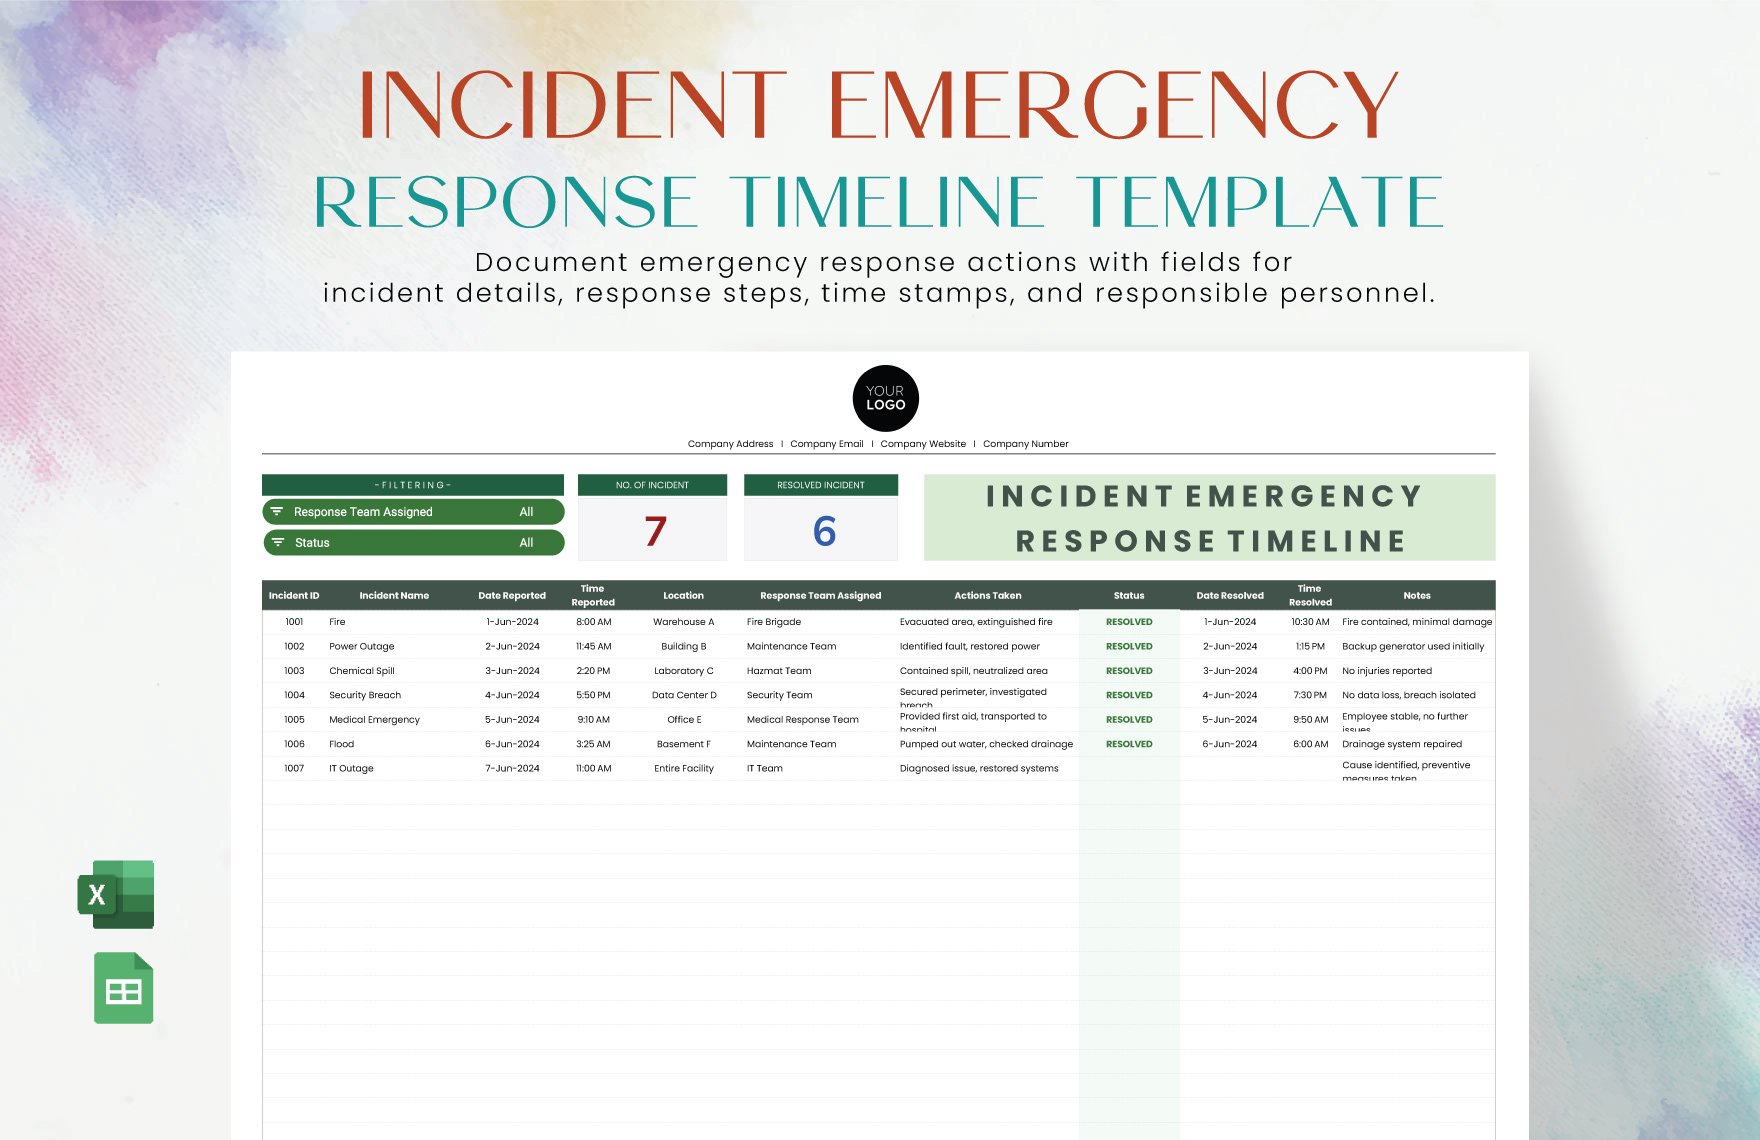 Incident Emergency Response Timeline Template in Excel, Google Sheets